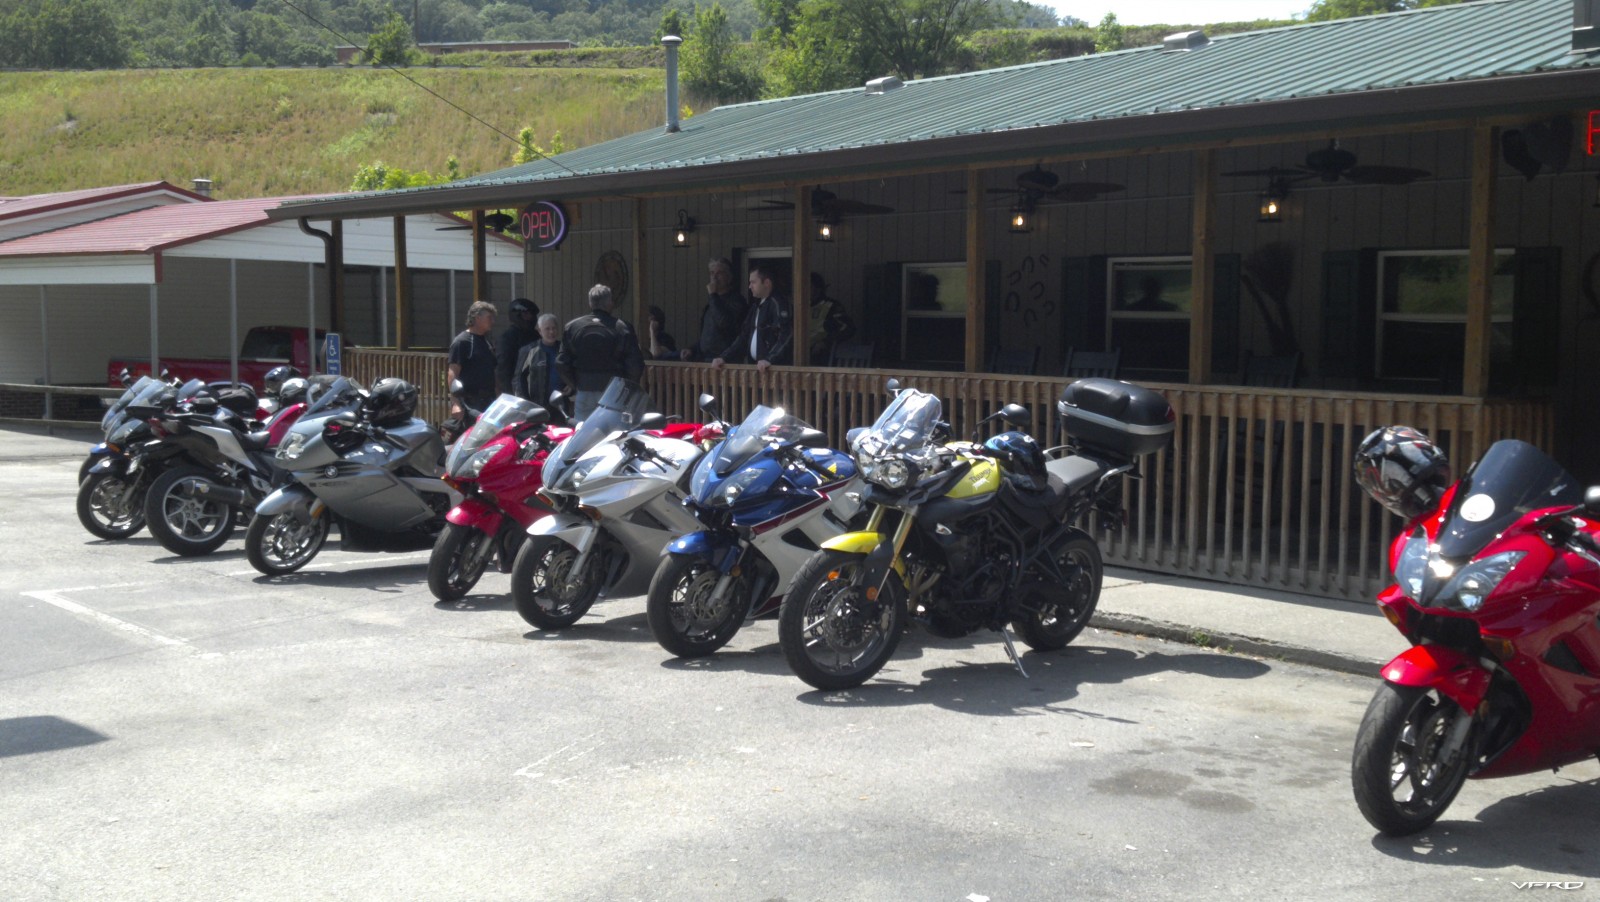 Hot Springs NC after riding the "rattler"